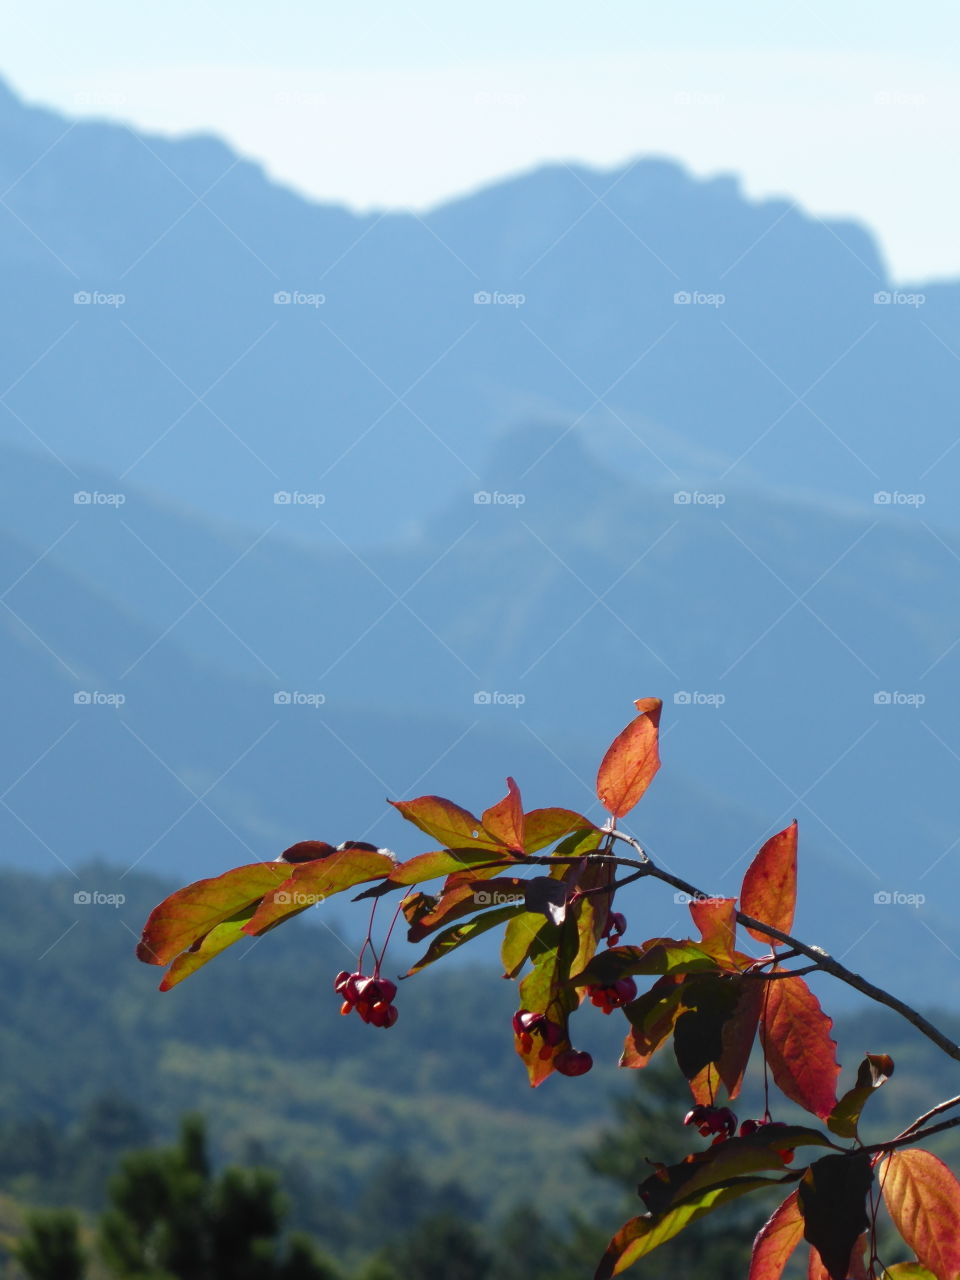 No Person, Nature, Outdoors, Sky, Leaf